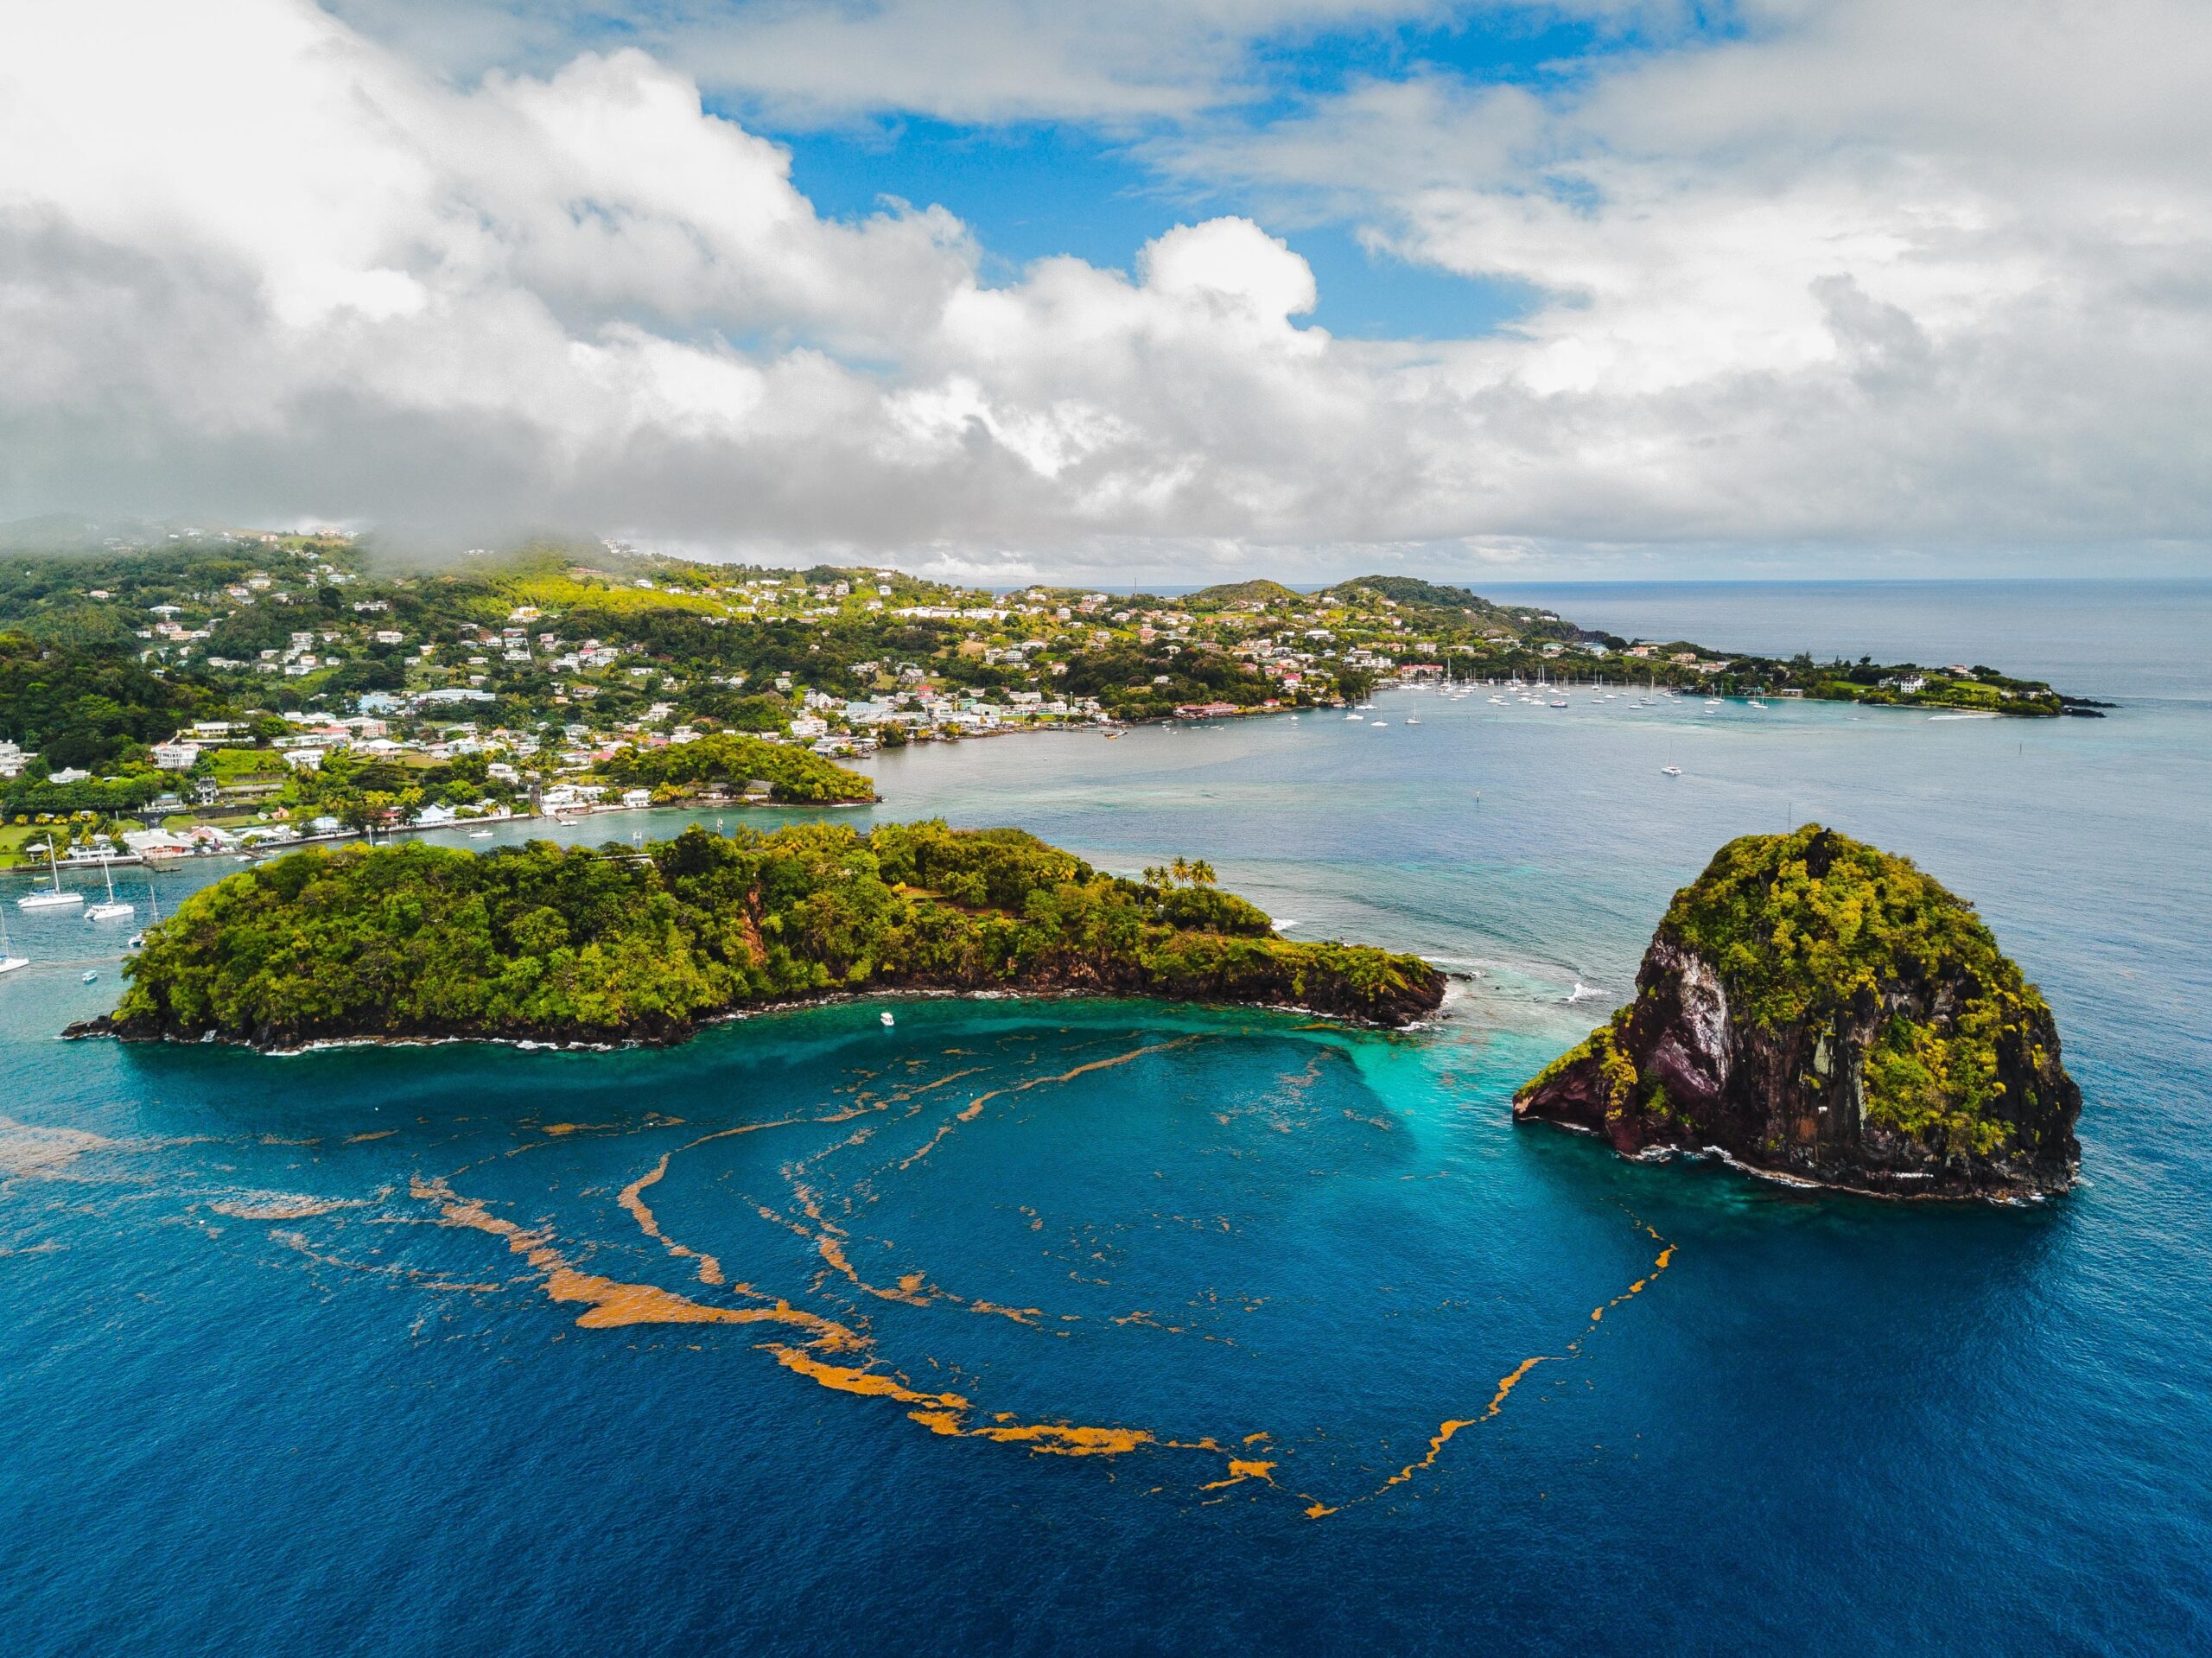 Young Island, Arnos Vale, Saint Vincent and the Grenadines